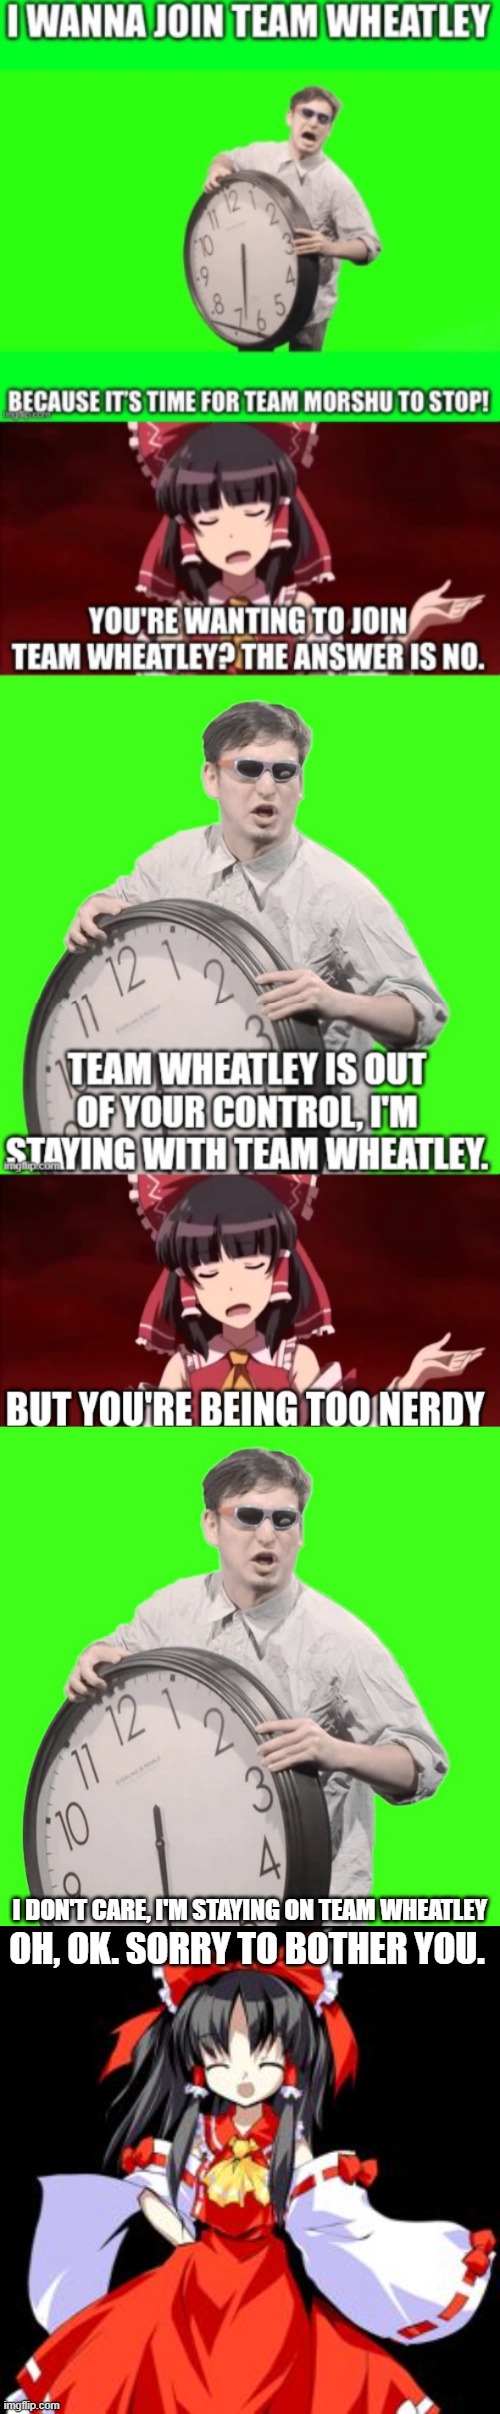 If Reimu flags this, she loses. | I DON'T CARE, I'M STAYING ON TEAM WHEATLEY; OH, OK. SORRY TO BOTHER YOU. | image tagged in it's time to stop,reimu hakurei | made w/ Imgflip meme maker